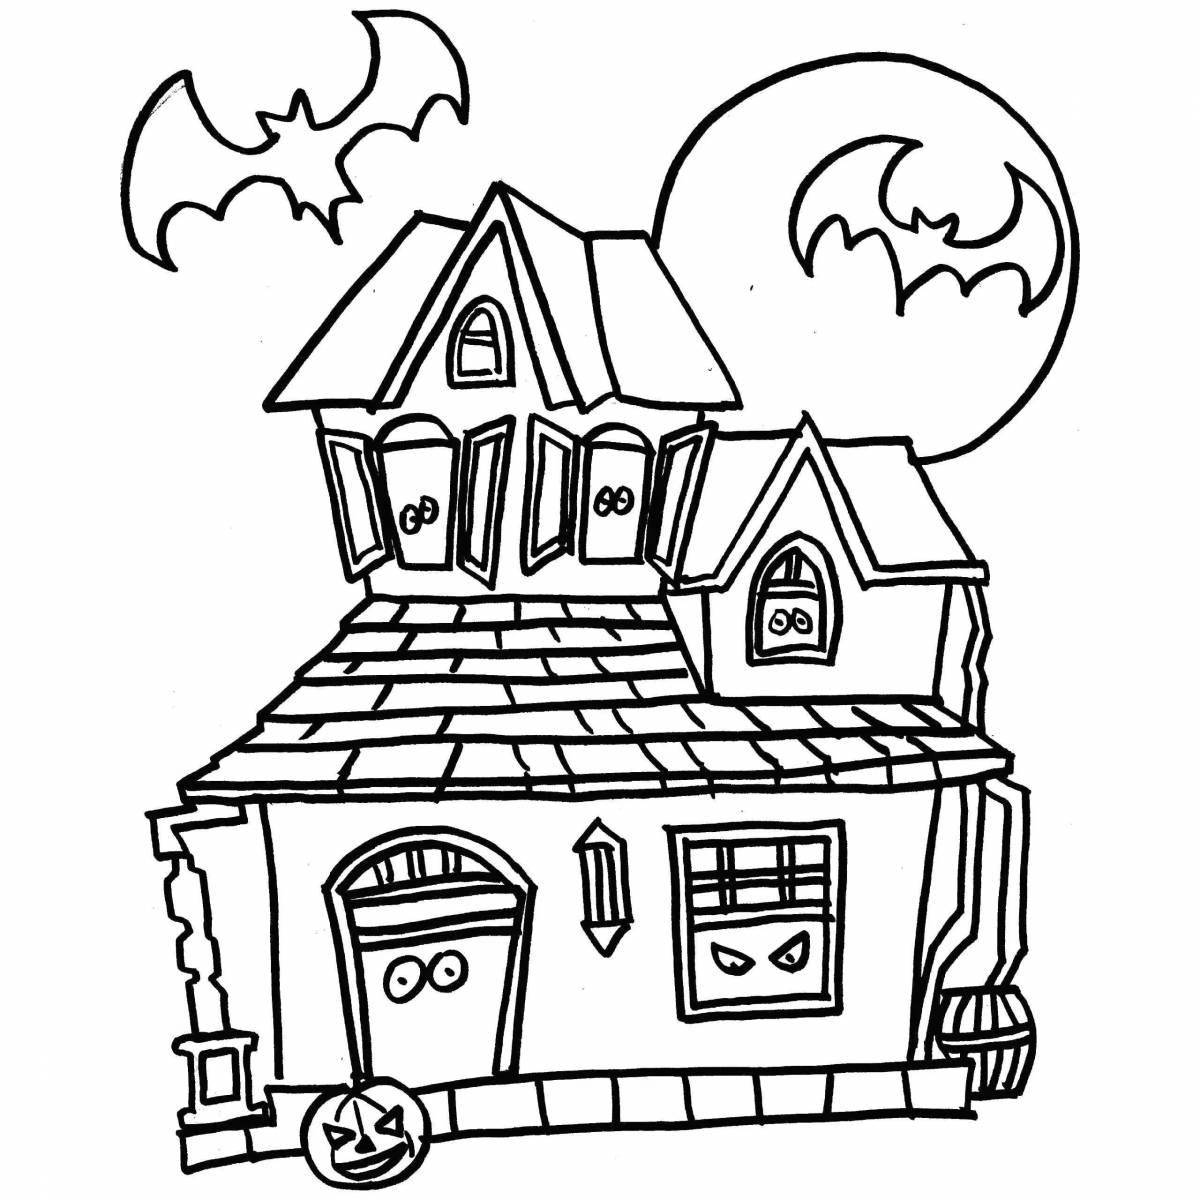 Adorable house coloring book for 6-7 year olds